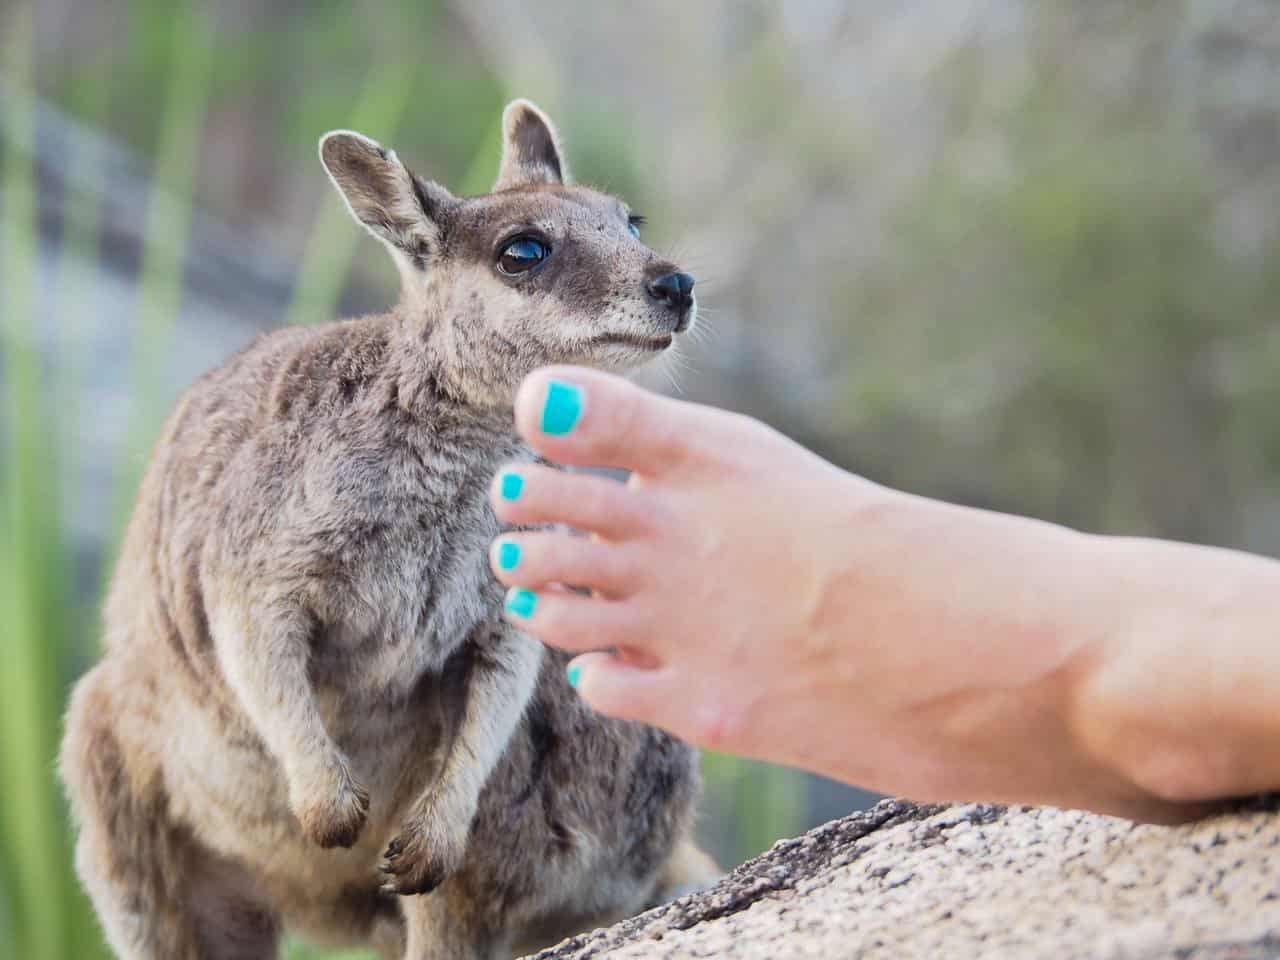 A rock wallaby at Granite Gorge in the Atherton Tablelands, Australia // travelmermaid.com